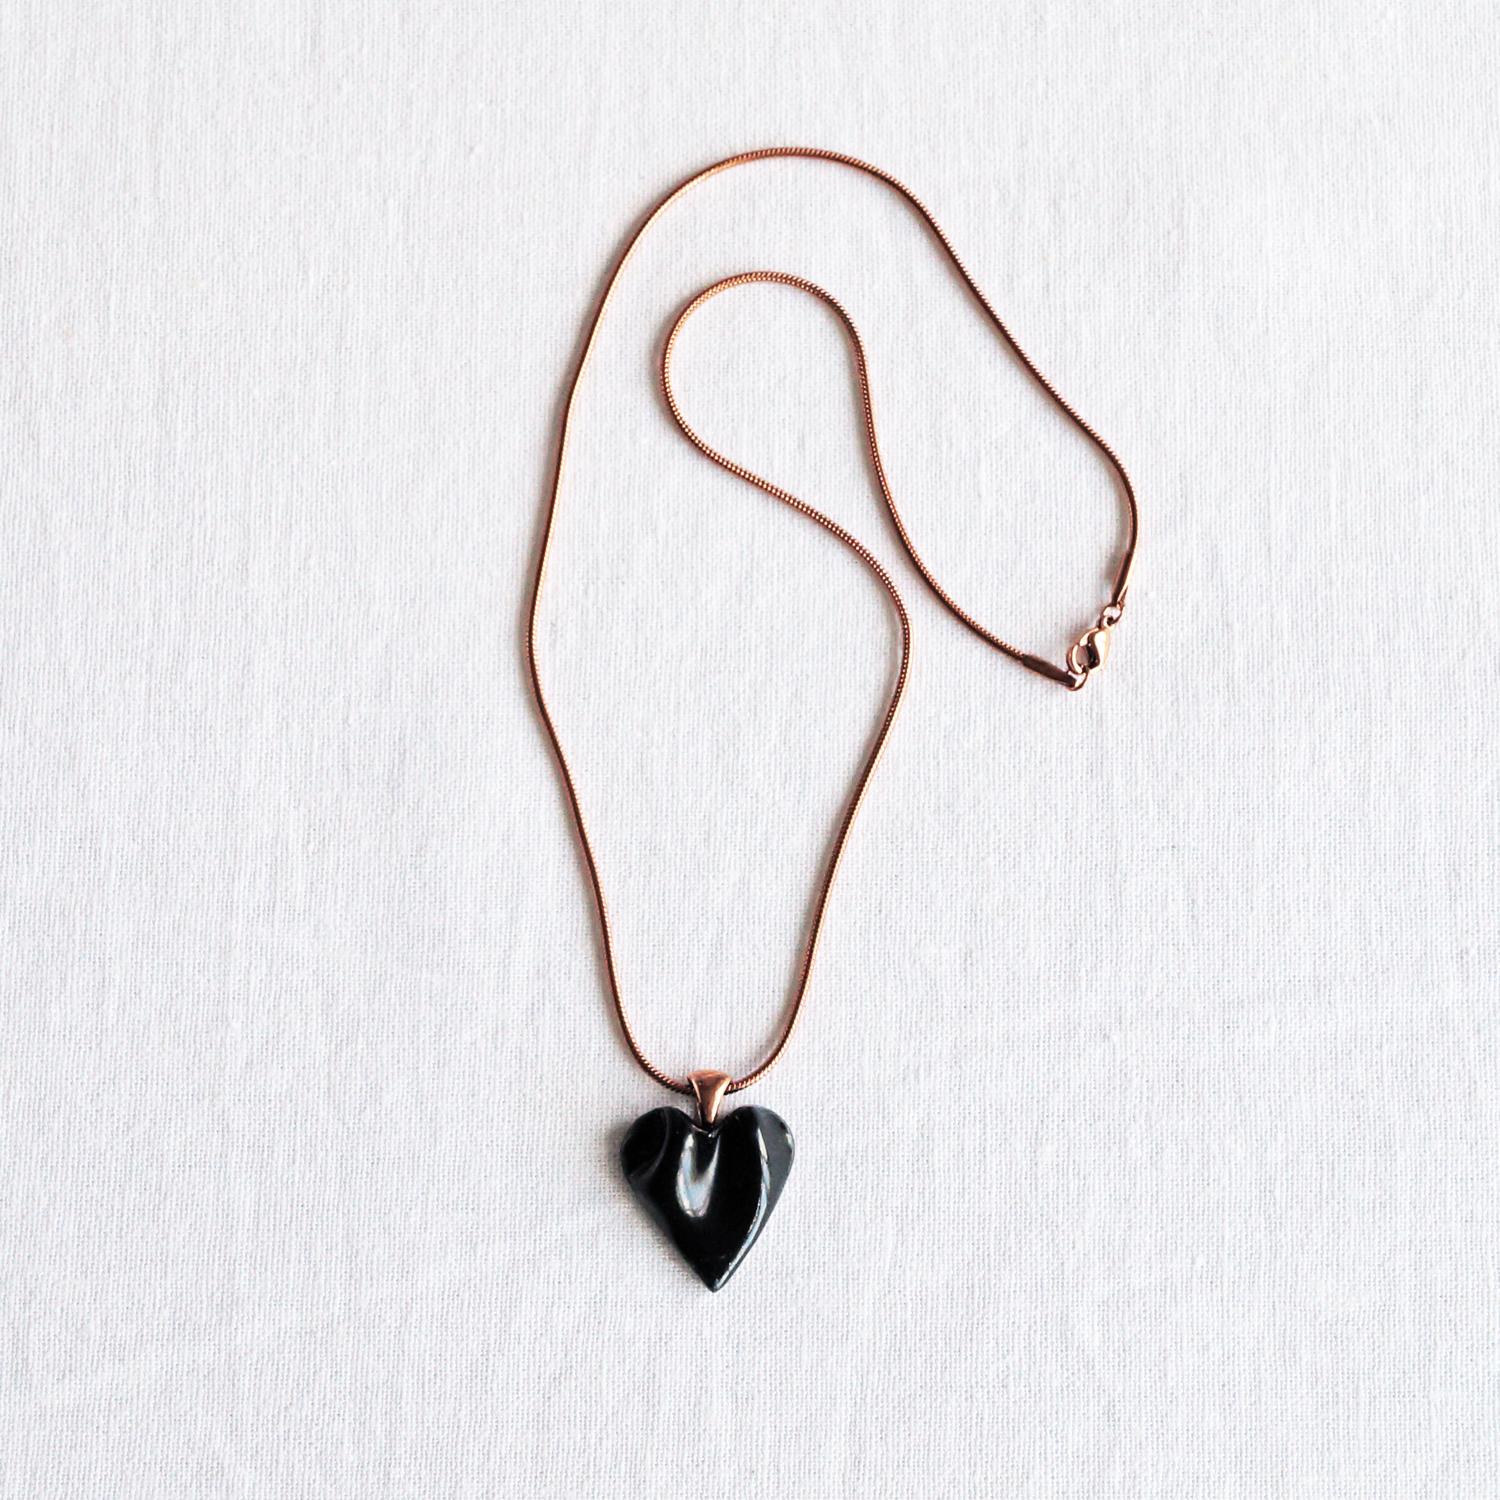 Draped HEART necklace, small black porcelain heart pendant, draped black heart necklace, 304 stainless steel, 11th anniversar